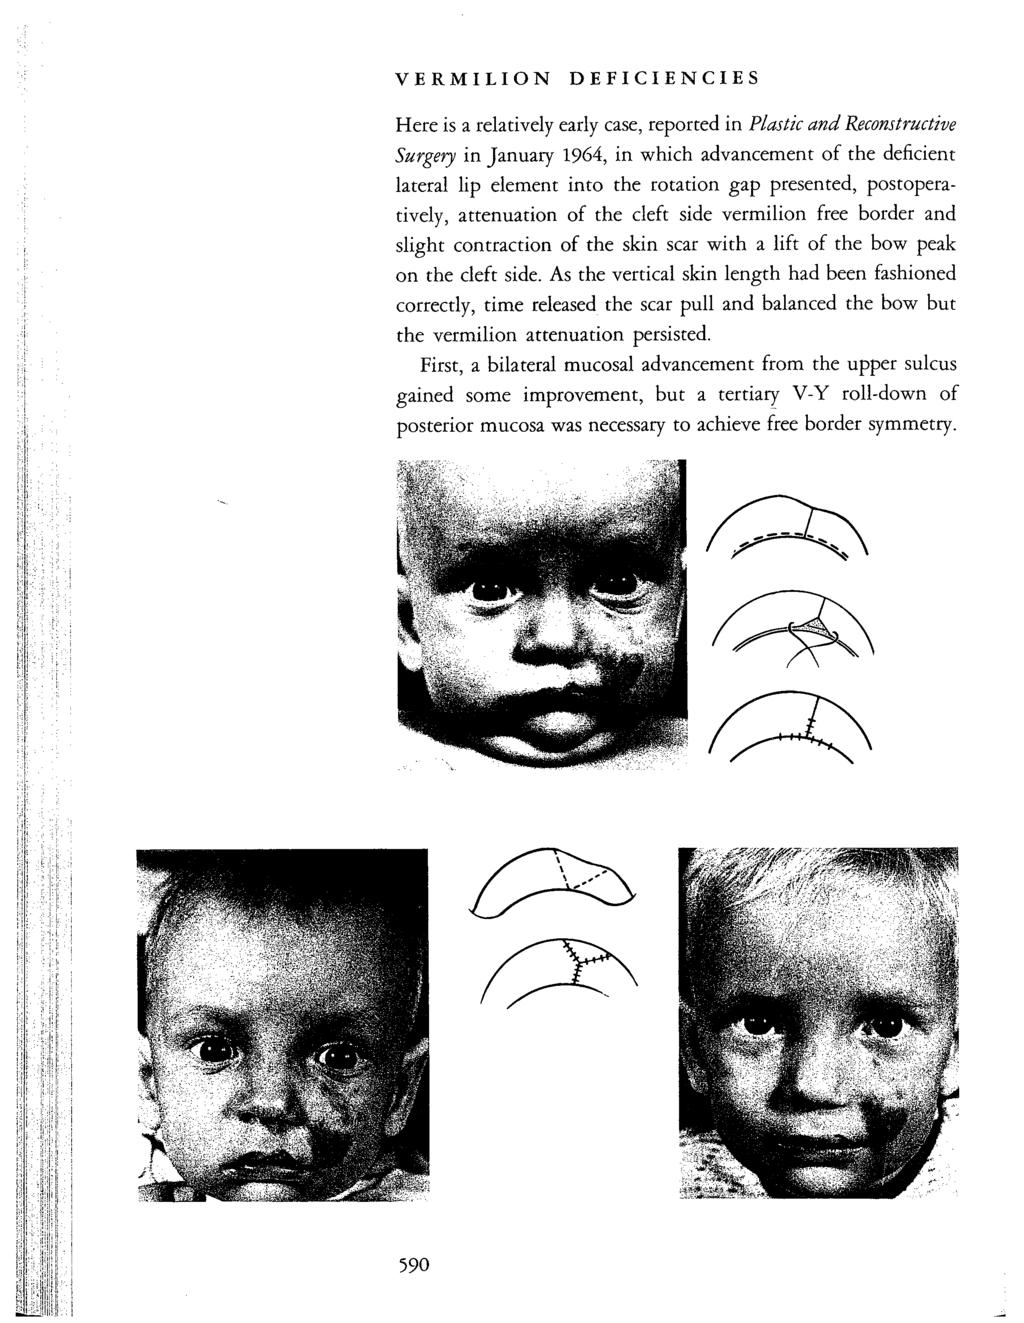 VERMILION DEFICIENCIES HERE IS RELATIVELY EARLY CASE REPORTED IN PLASTIC AND RECONSTRUCTIVE SURGE IN JANUARY 1964 IN WHICH ADVANCEMENT OF THE DEFICIENT LATERAL LIP ELEMENT INTO THE ROTATION GAP